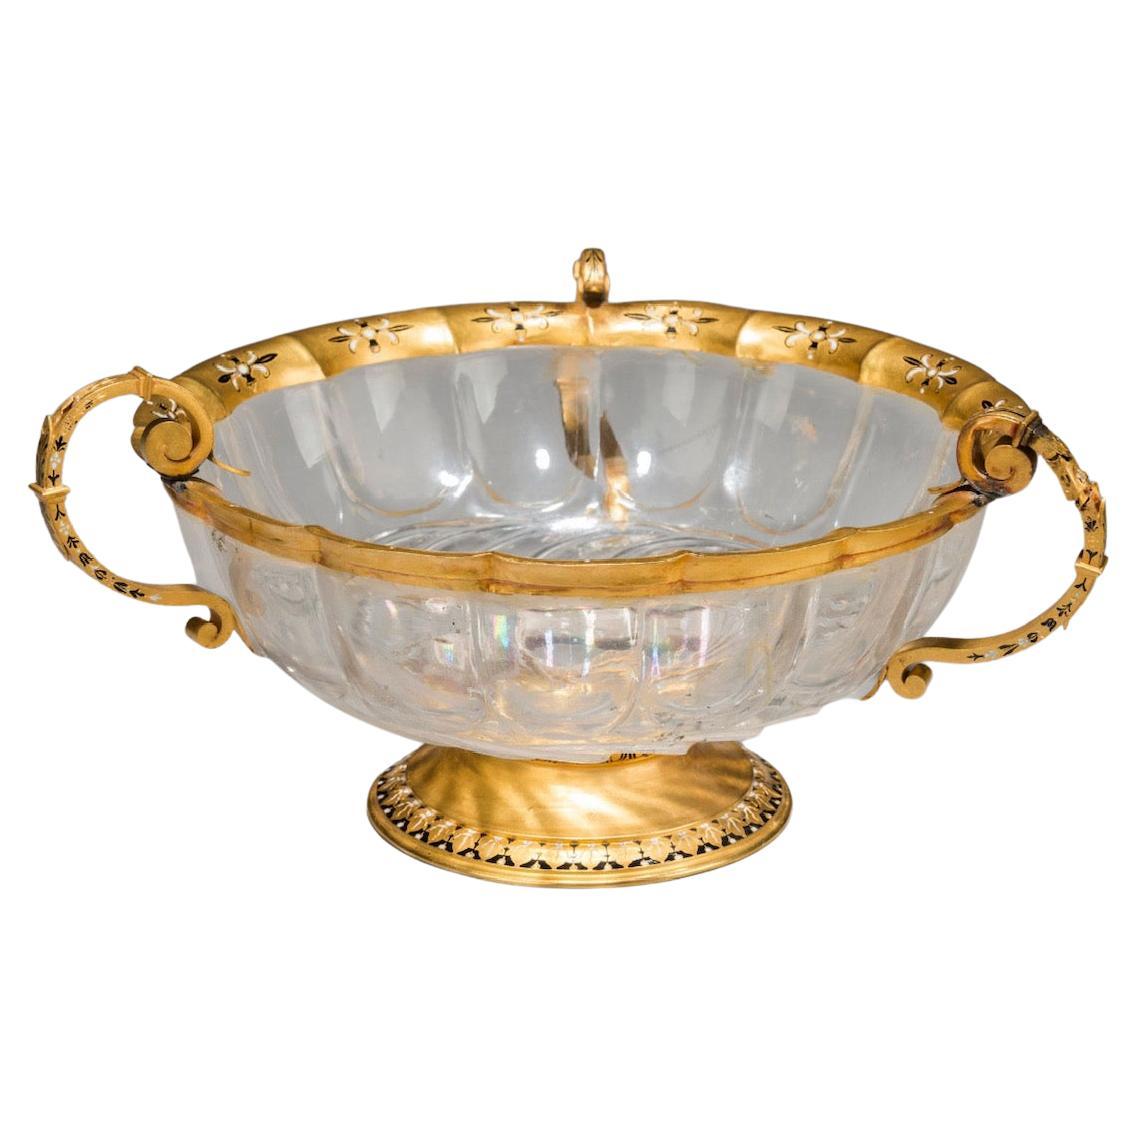 Exquisite 13th Century Rock Crystal and Gold Bowl in Superb Condition For Sale